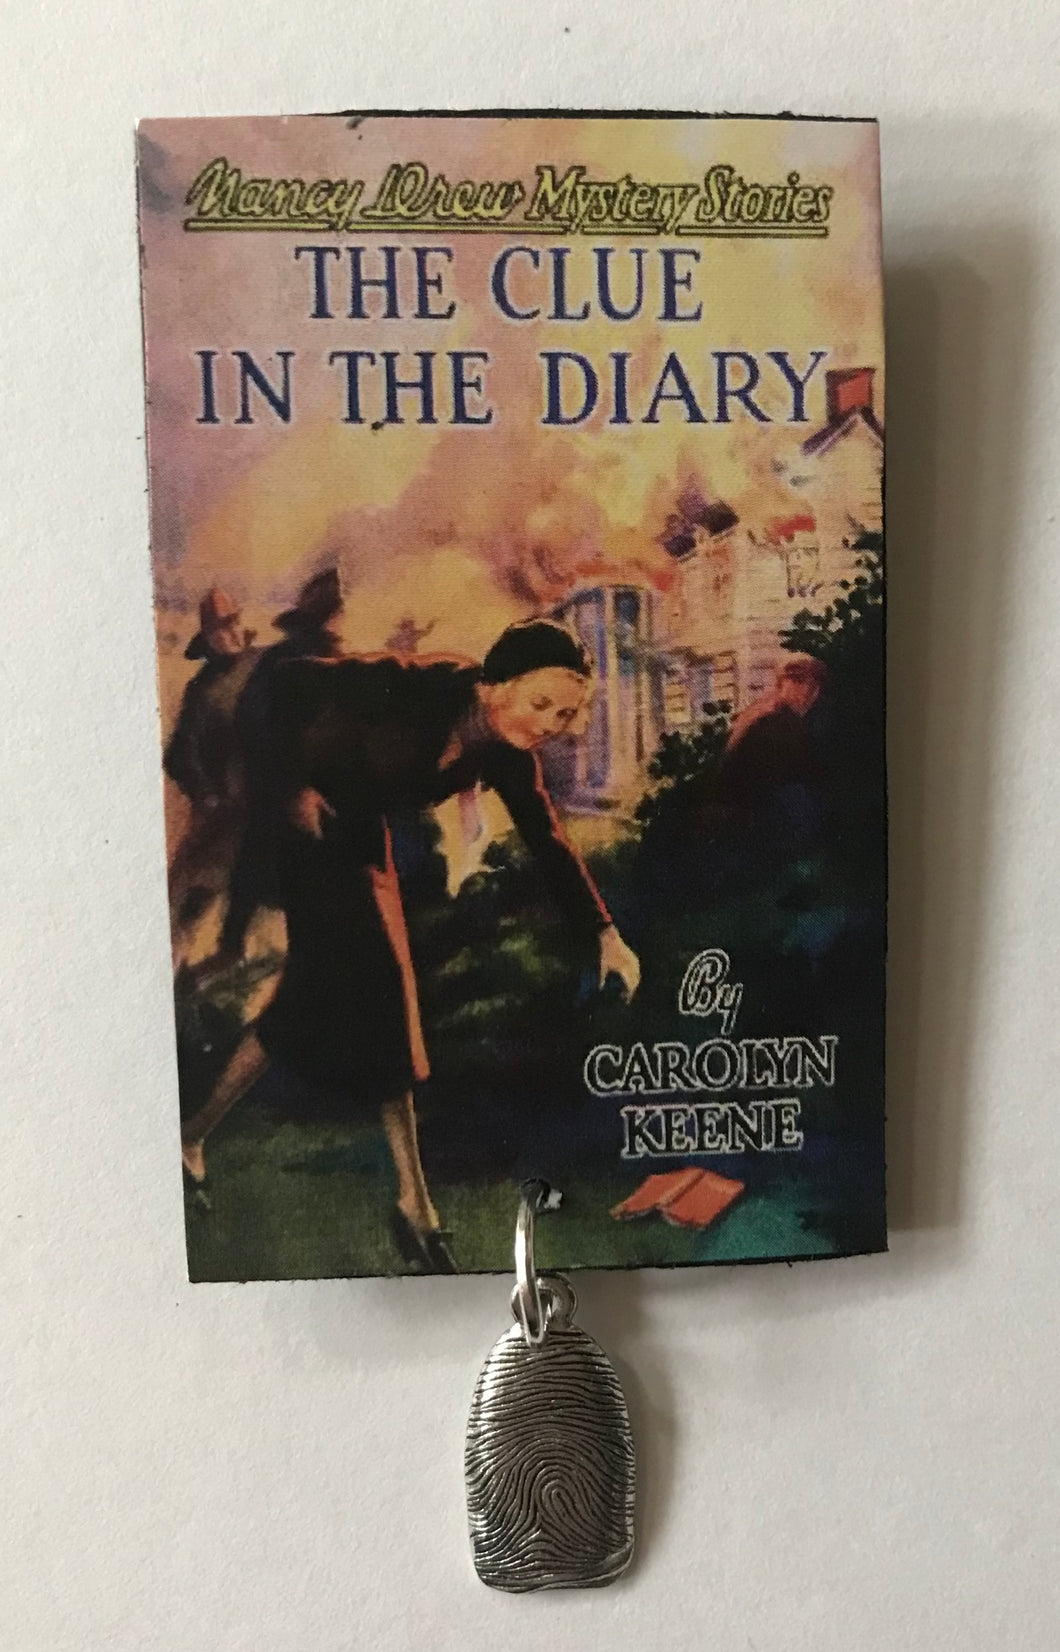 Nancy Drew Book Cover Clue in the Diary Pin or Ornament